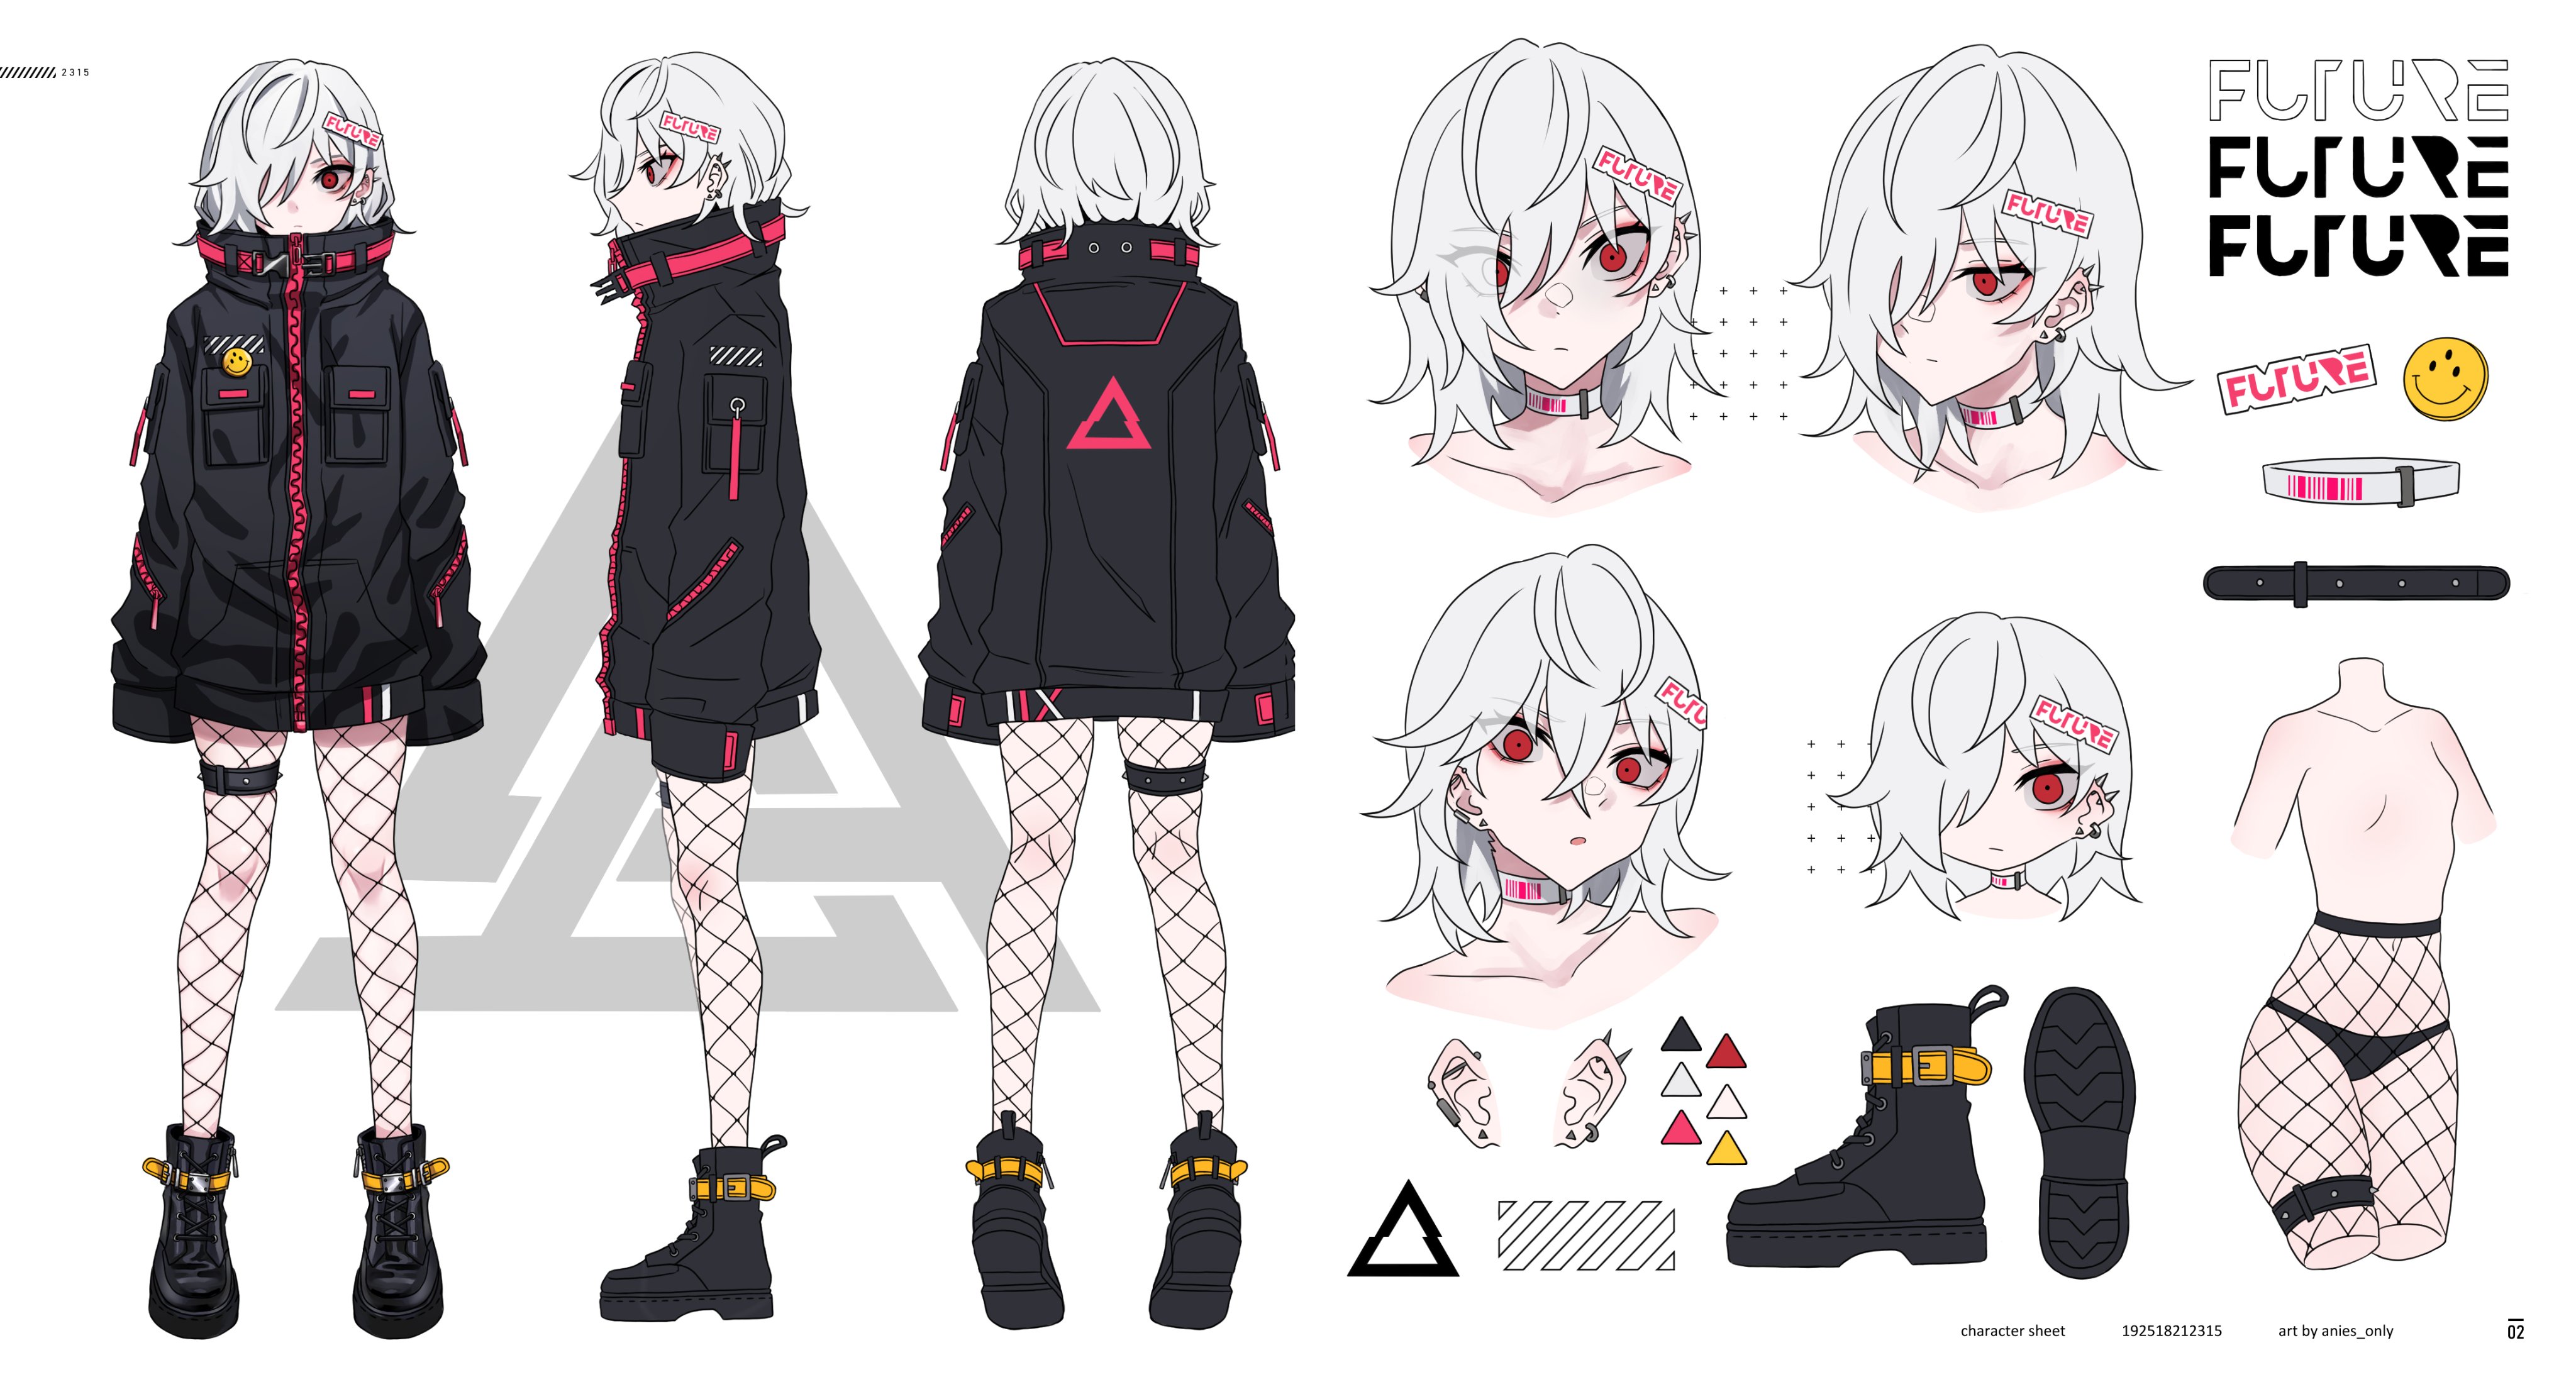 Anies First Character Sheet Commission You Now Have The Option To Commission Me To Draw Character Sheets Like This For 300 Commissioned By Aiyru1 Thank You T Co Afhr9o5baa